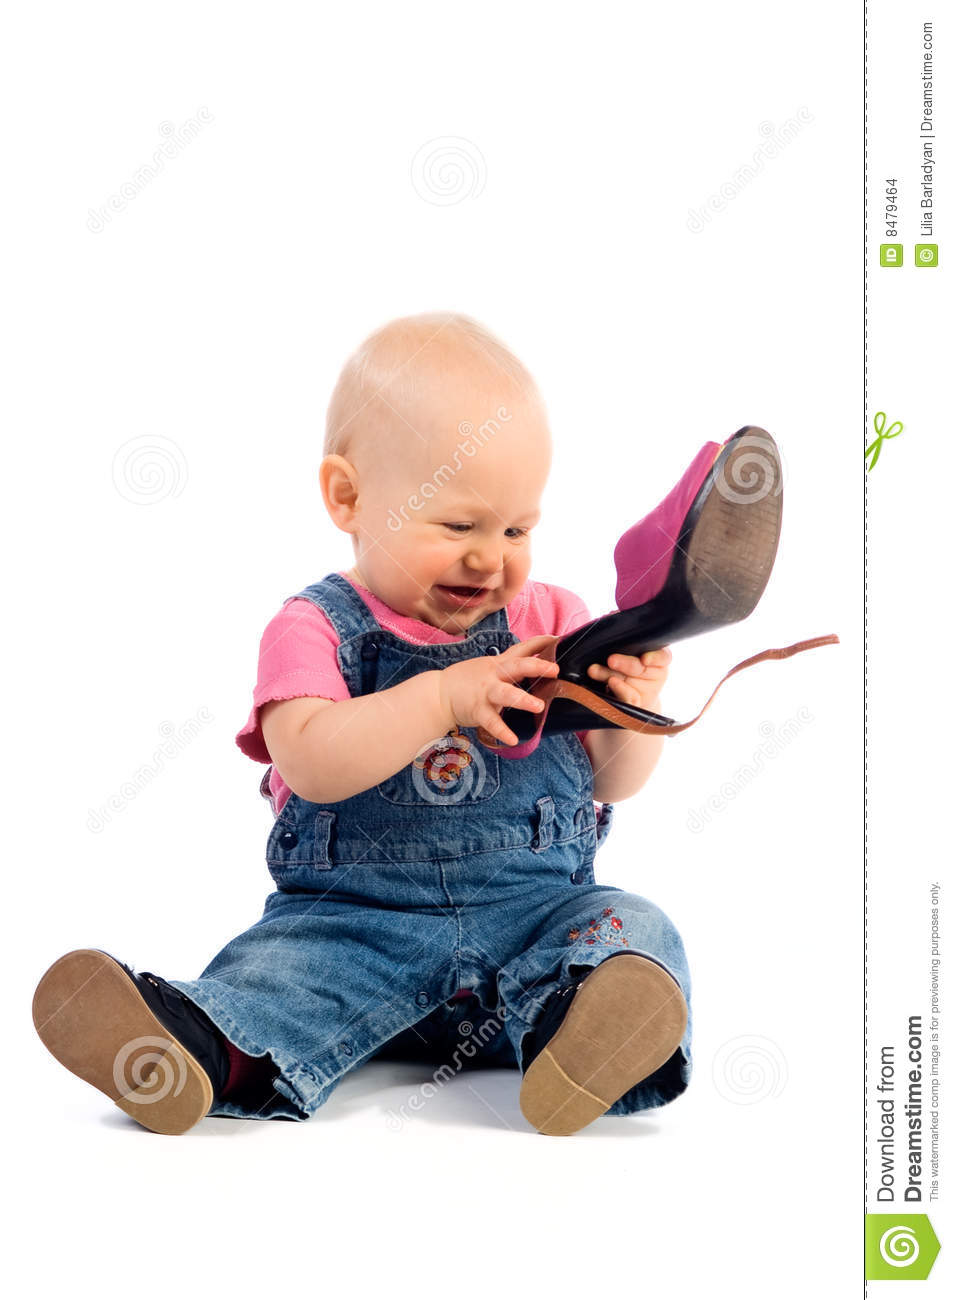 Funny Baby With Shoe Stock Images   Image  8479464